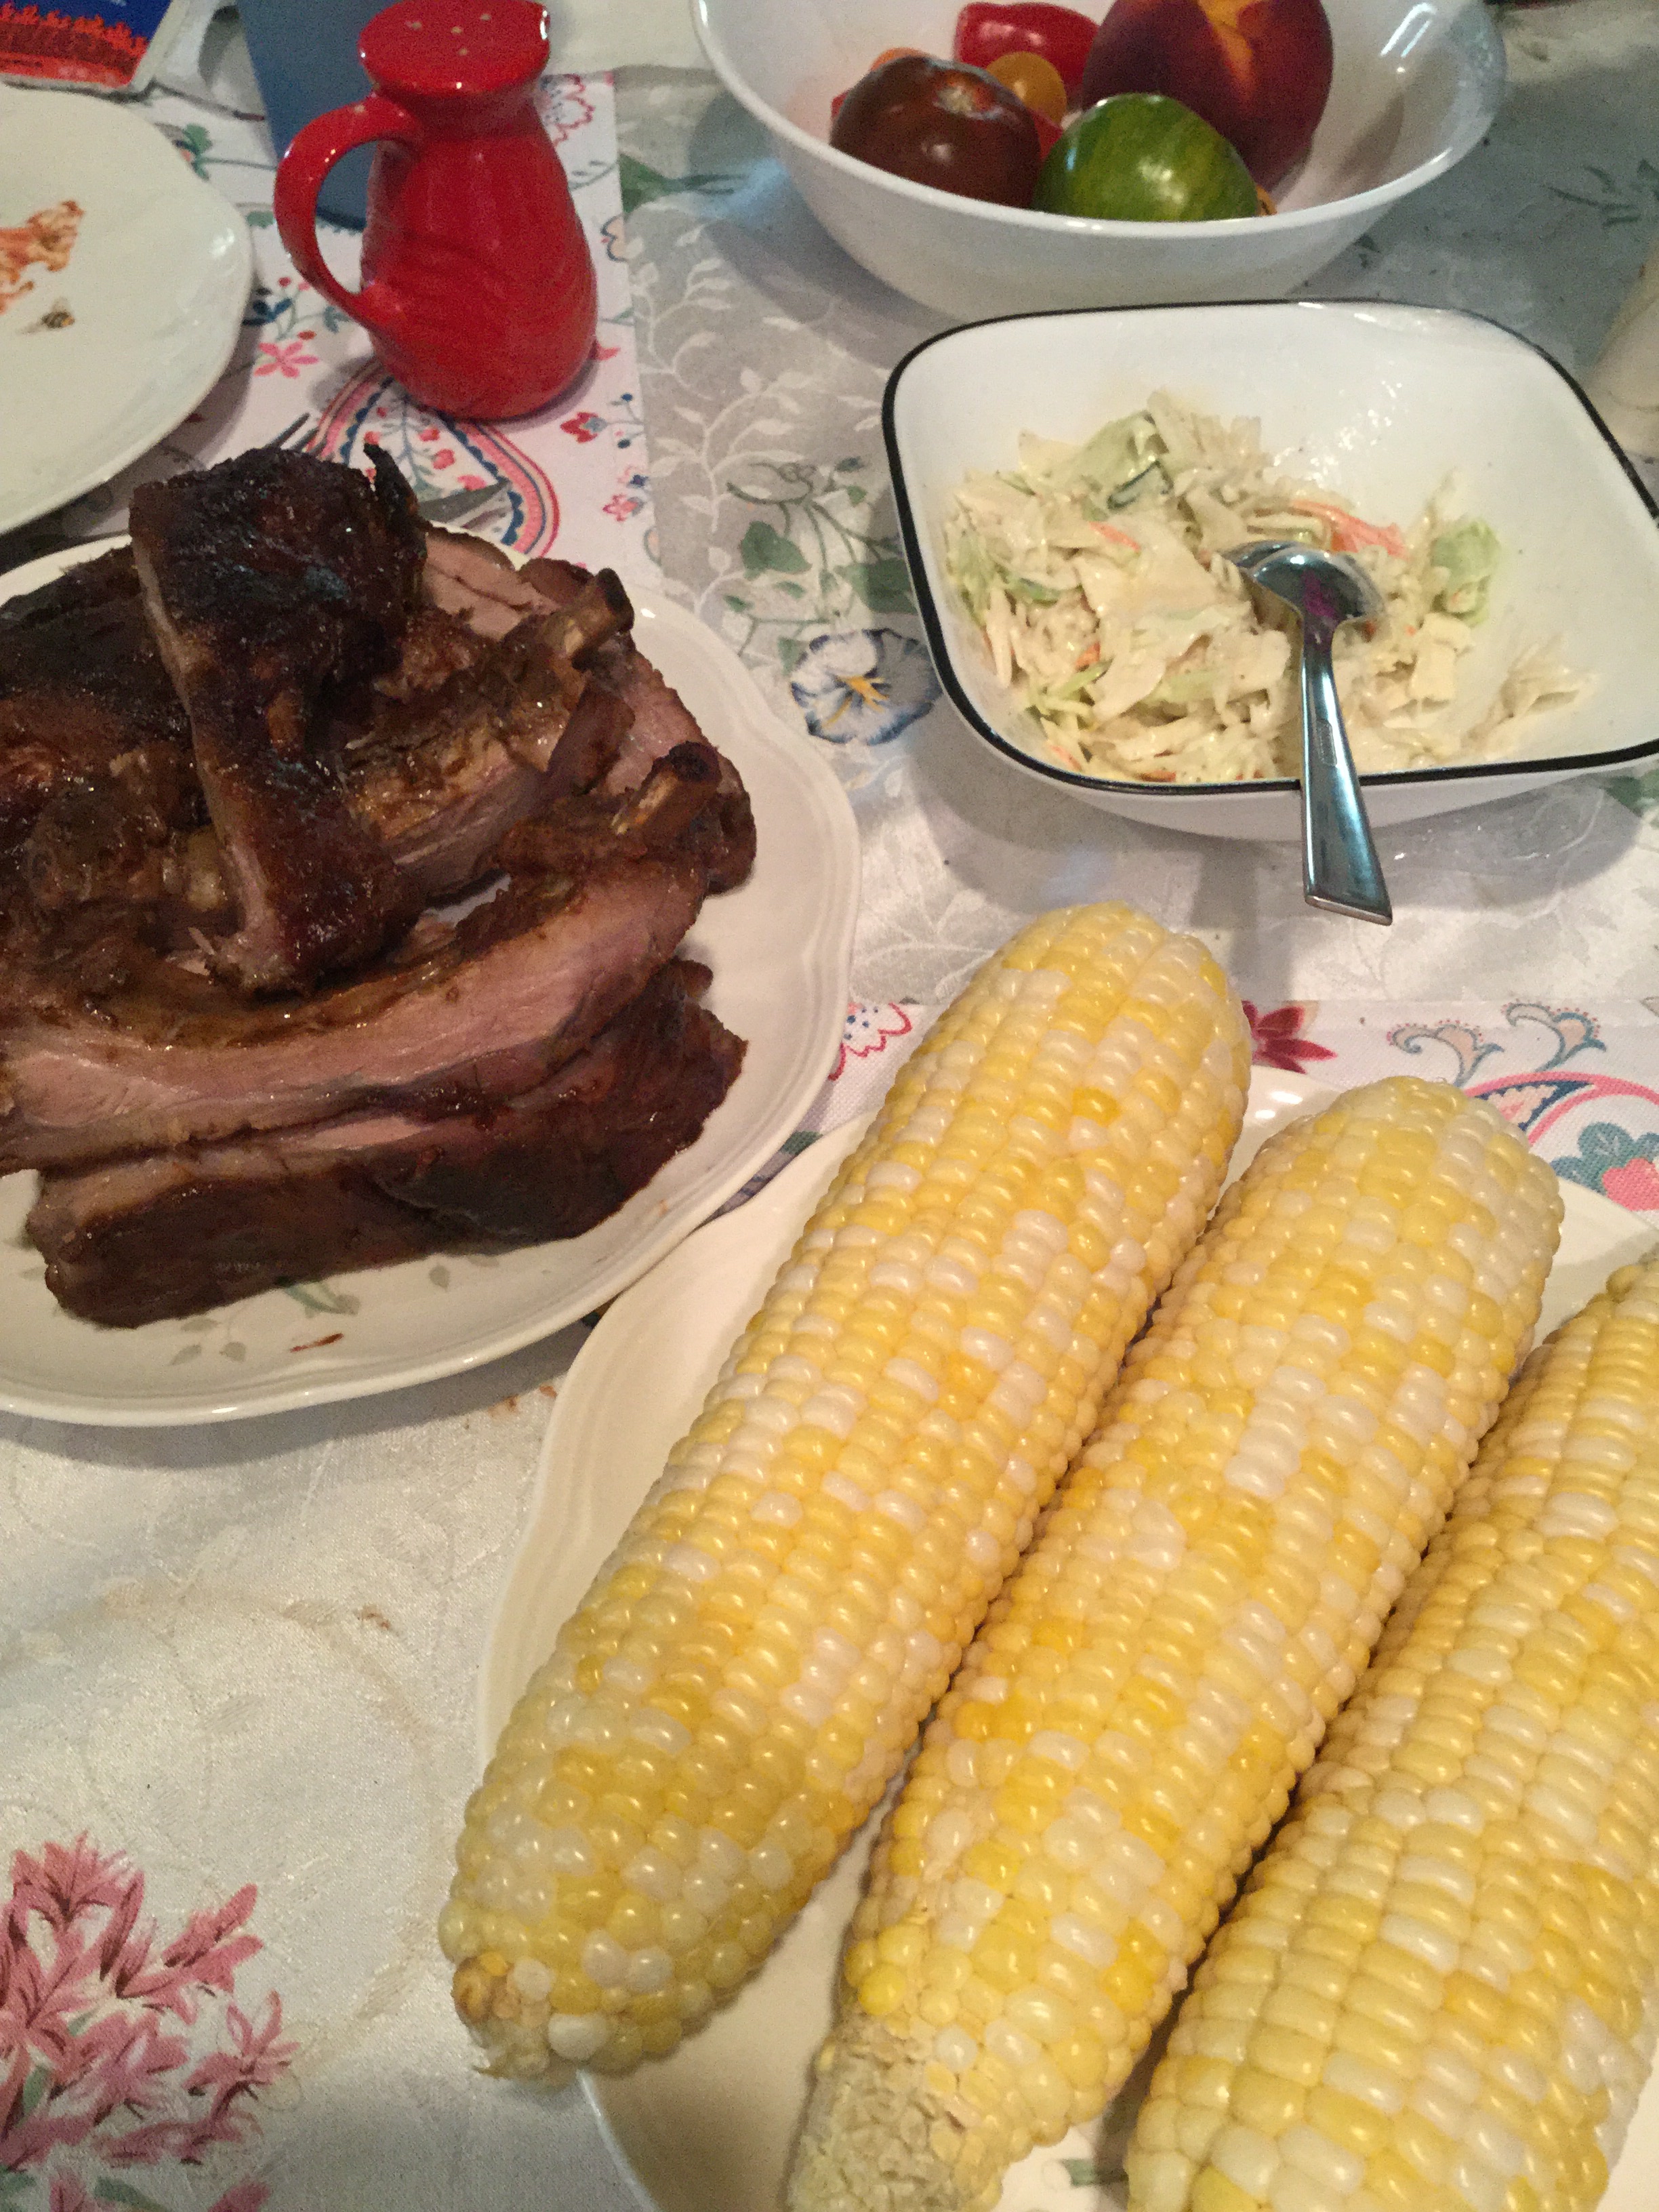 We had the corn tonight with left over ribs and it was good!